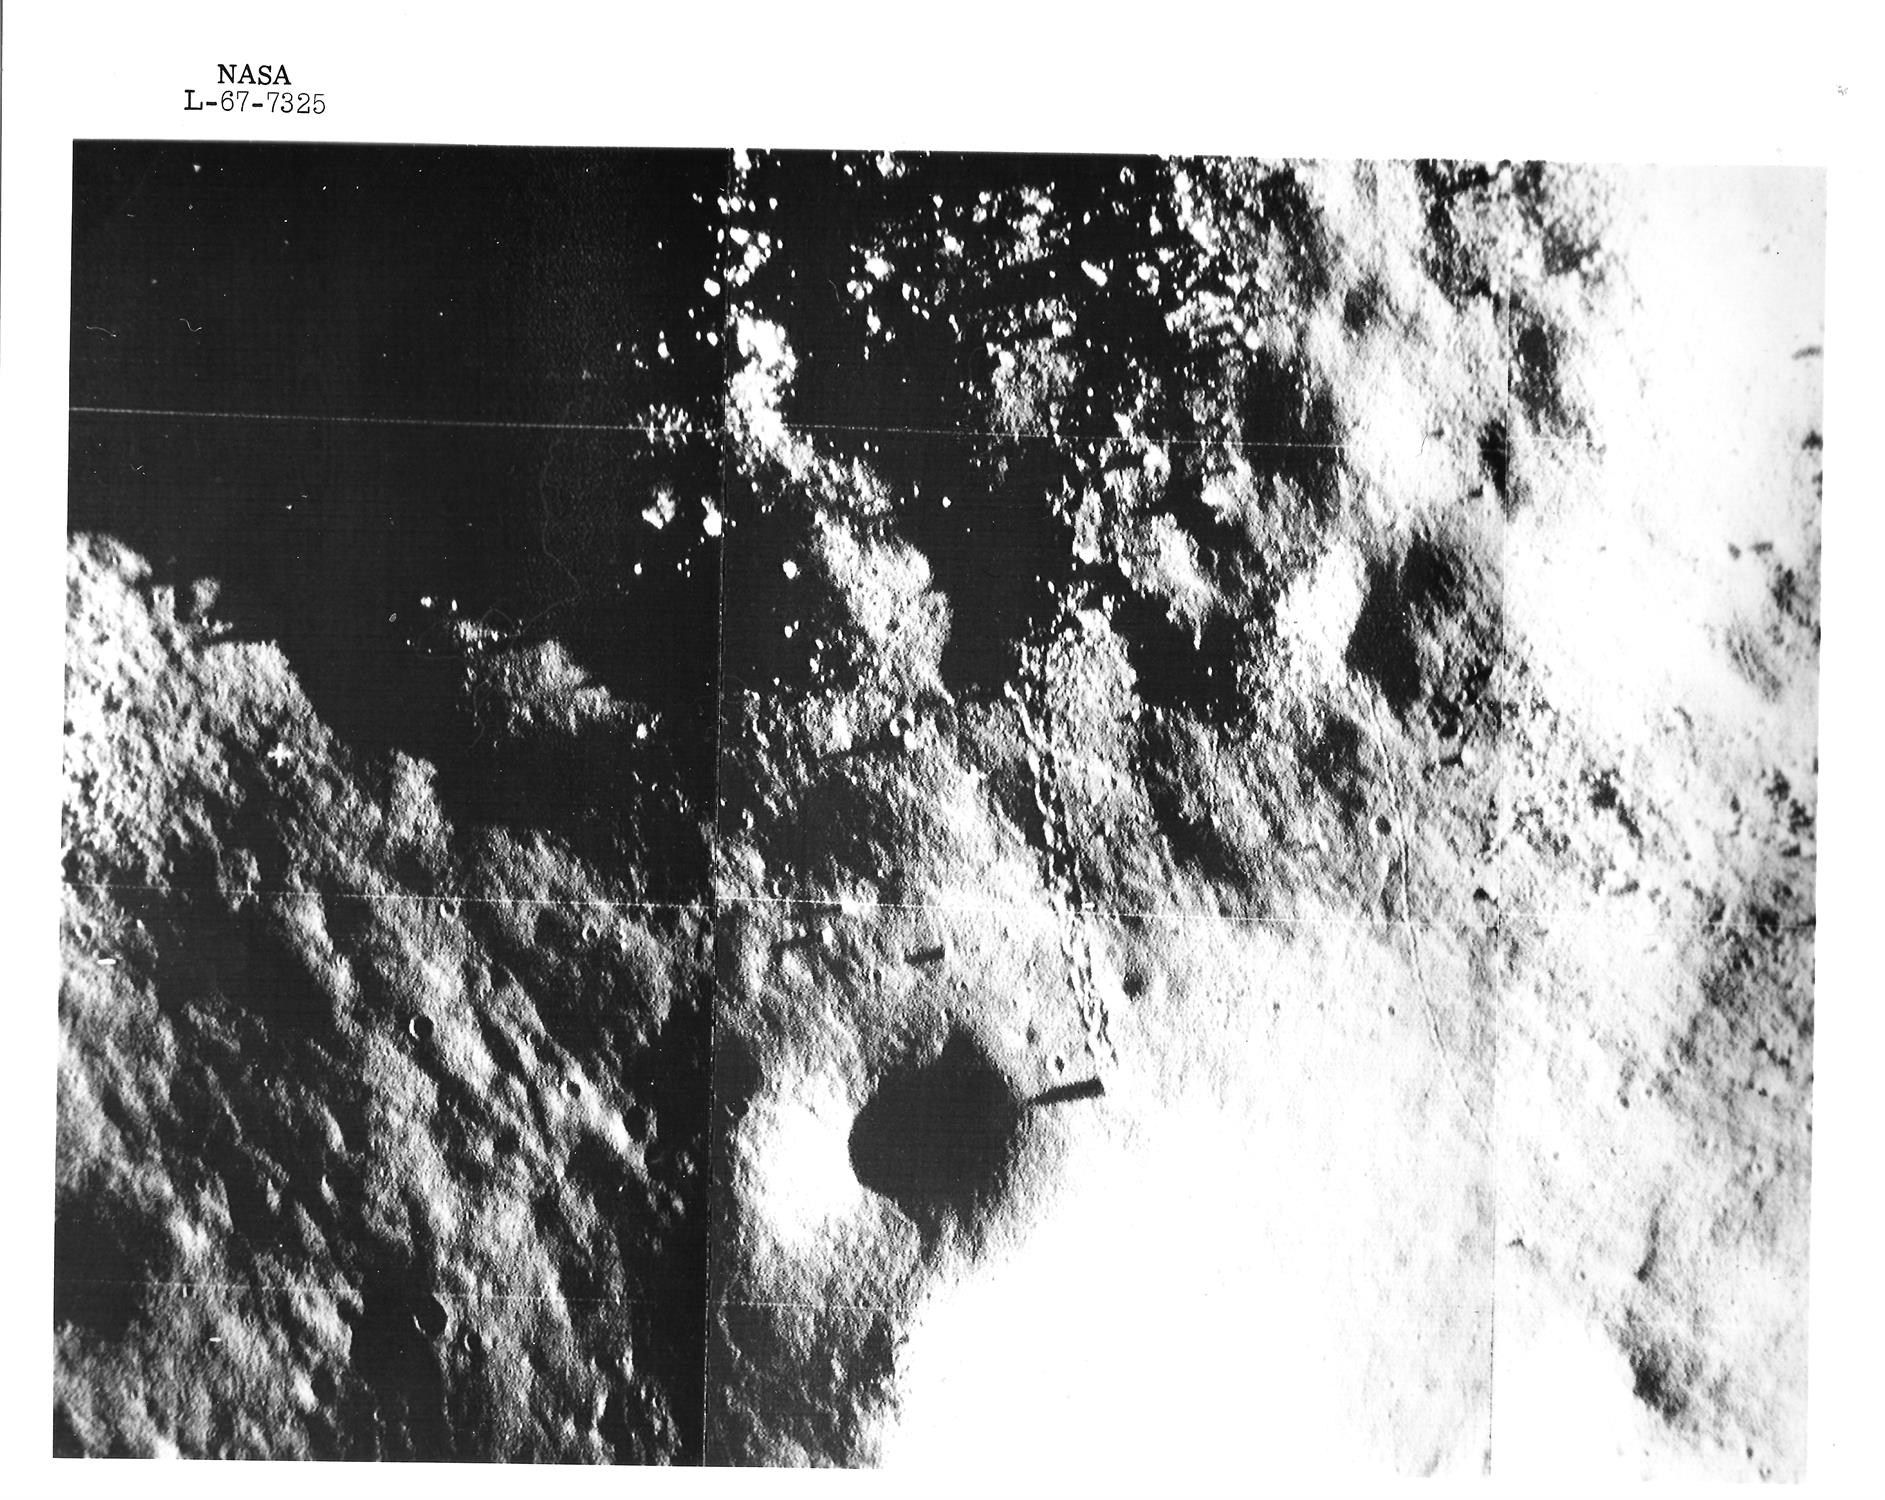 Lunar Orbiter V. The first photograph of nearly full Earth taken from space. - Image 3 of 6